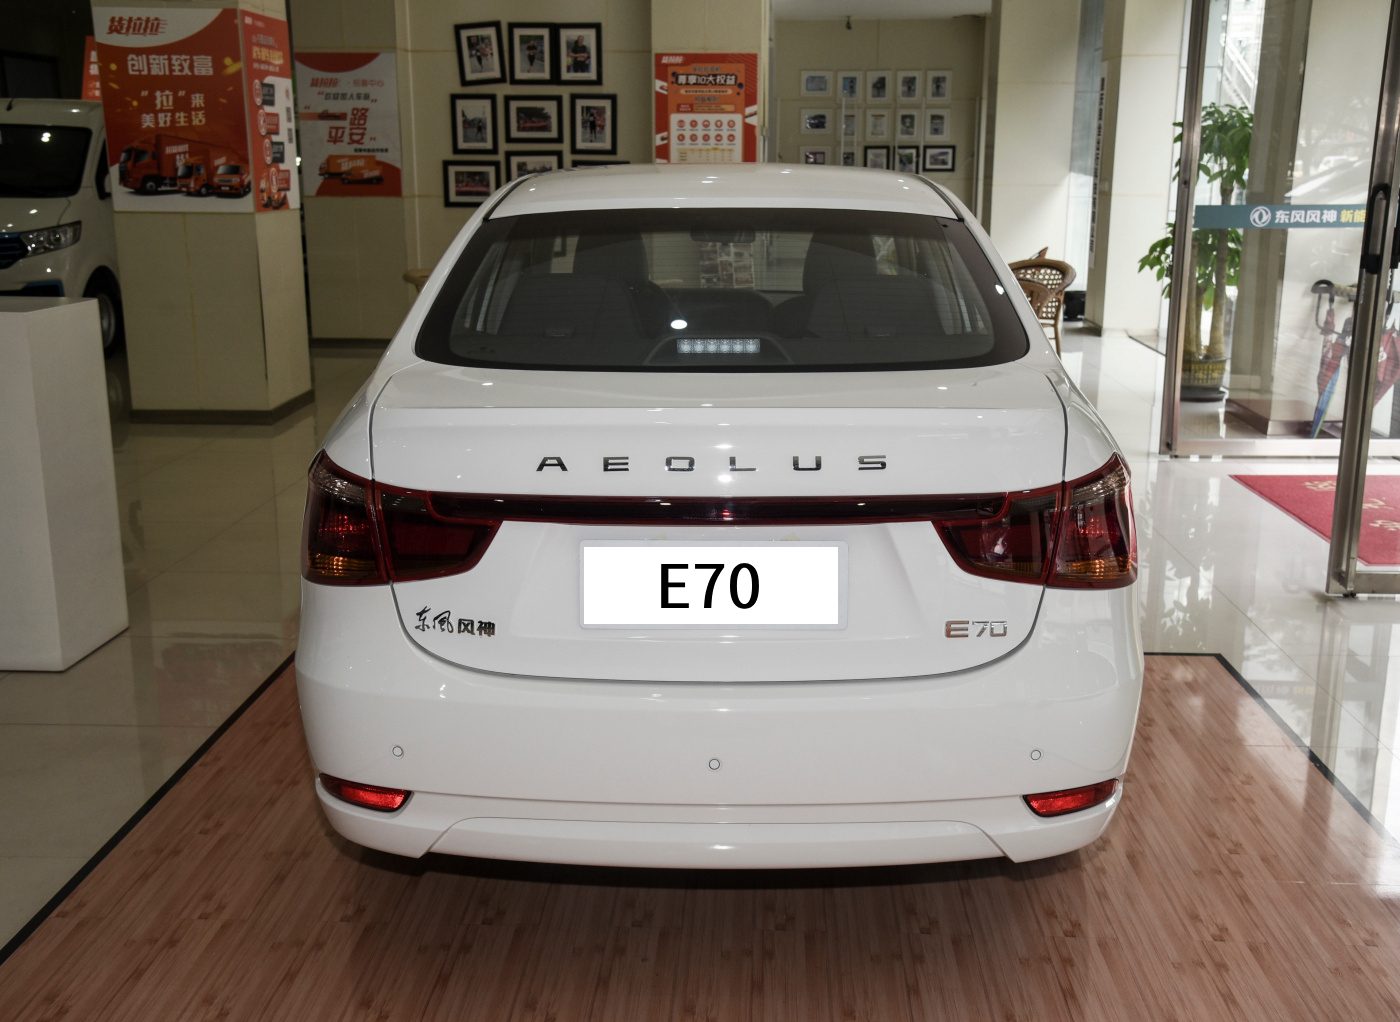 Used Car Dongfeng Aeolus E70 New Energy Pure Electric Vehicle EV Car in Stock - E70 - 4